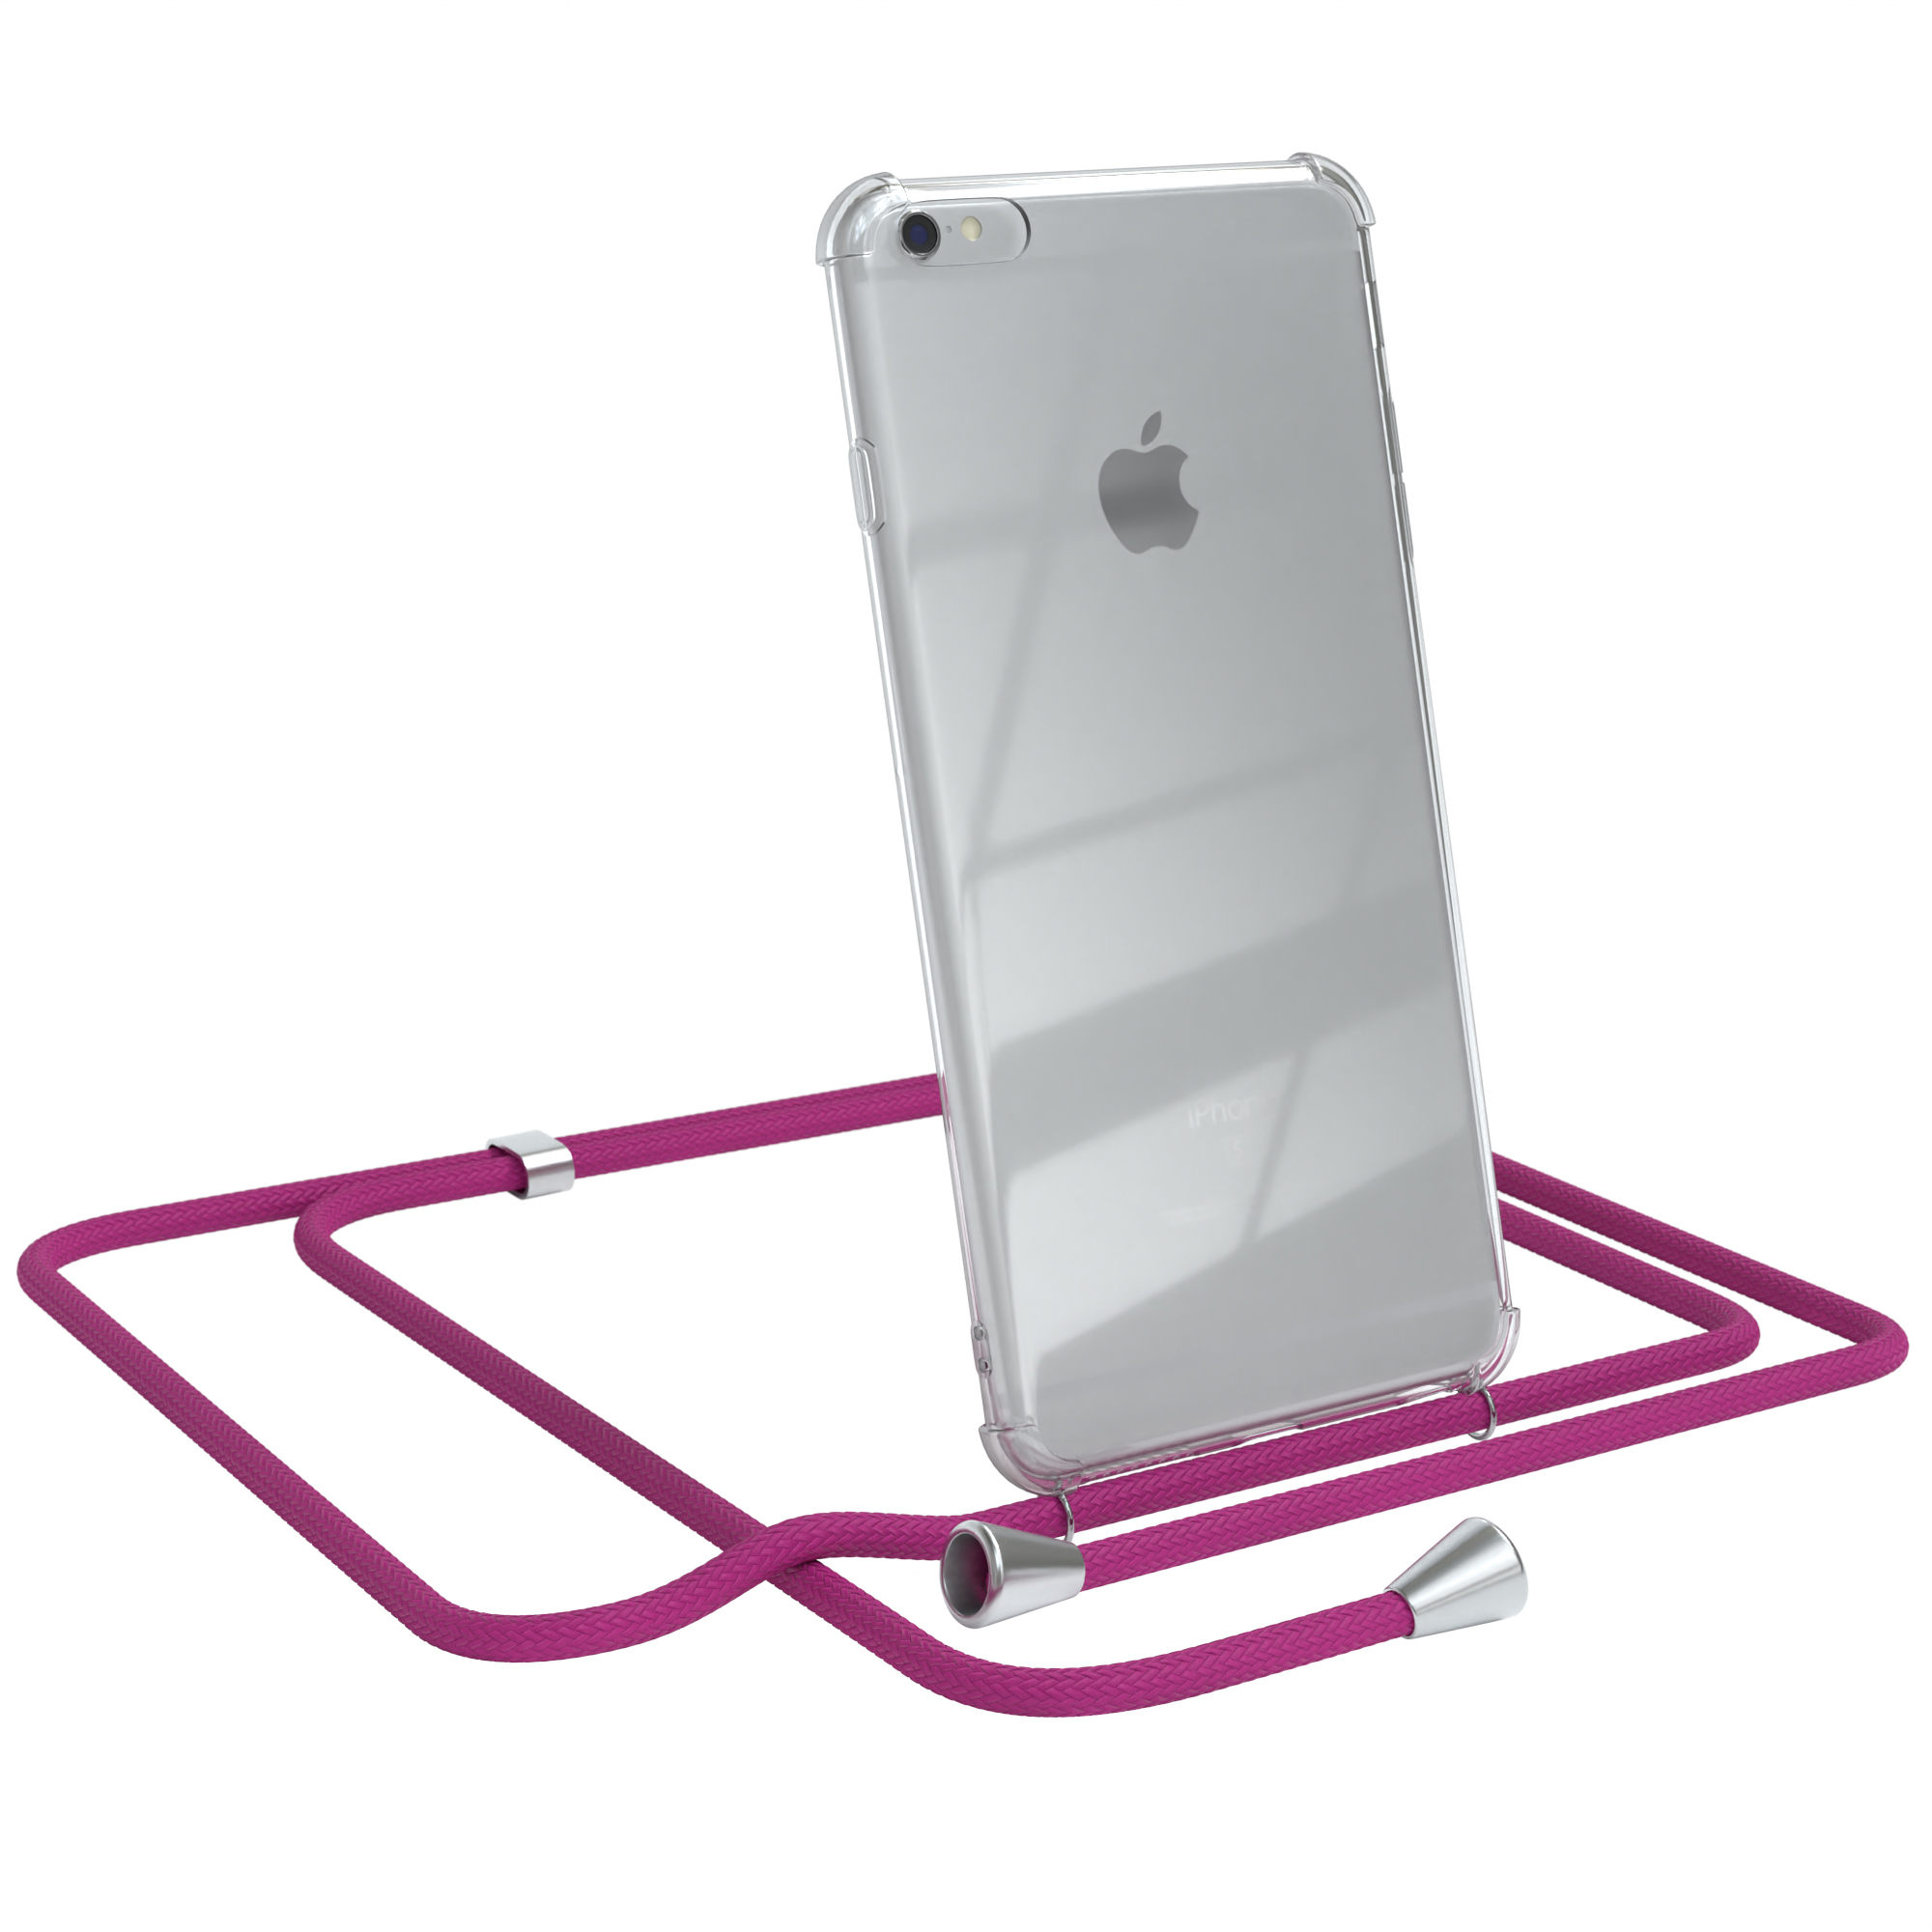 / Umhängeband, Clear Apple, Plus iPhone EAZY / 6S Plus, mit Silber Cover Clips 6 Umhängetasche, CASE Pink